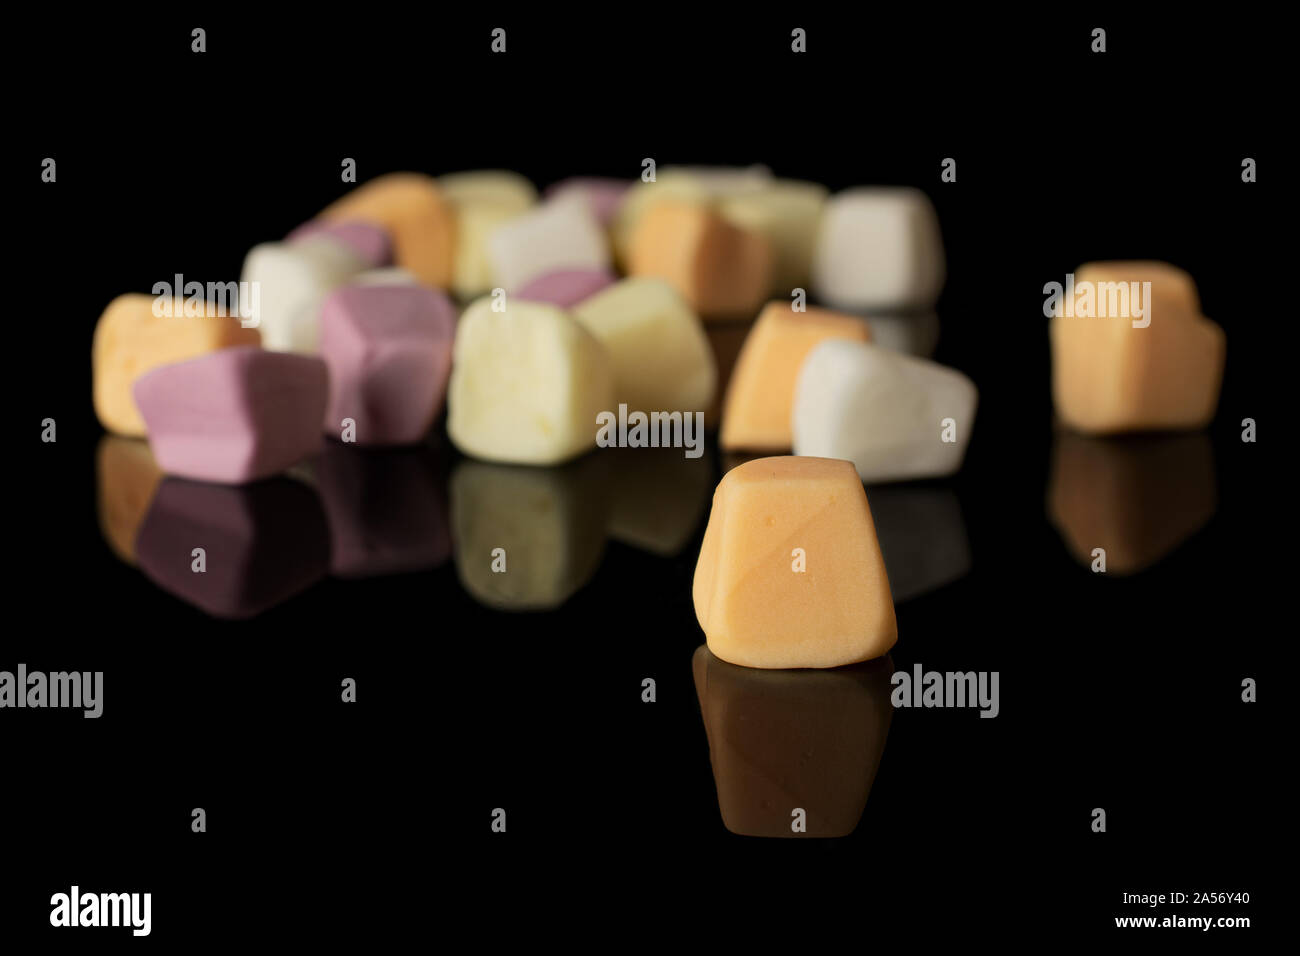 Lot of whole disordered soft pastel candy isolated on black glass Stock Photo